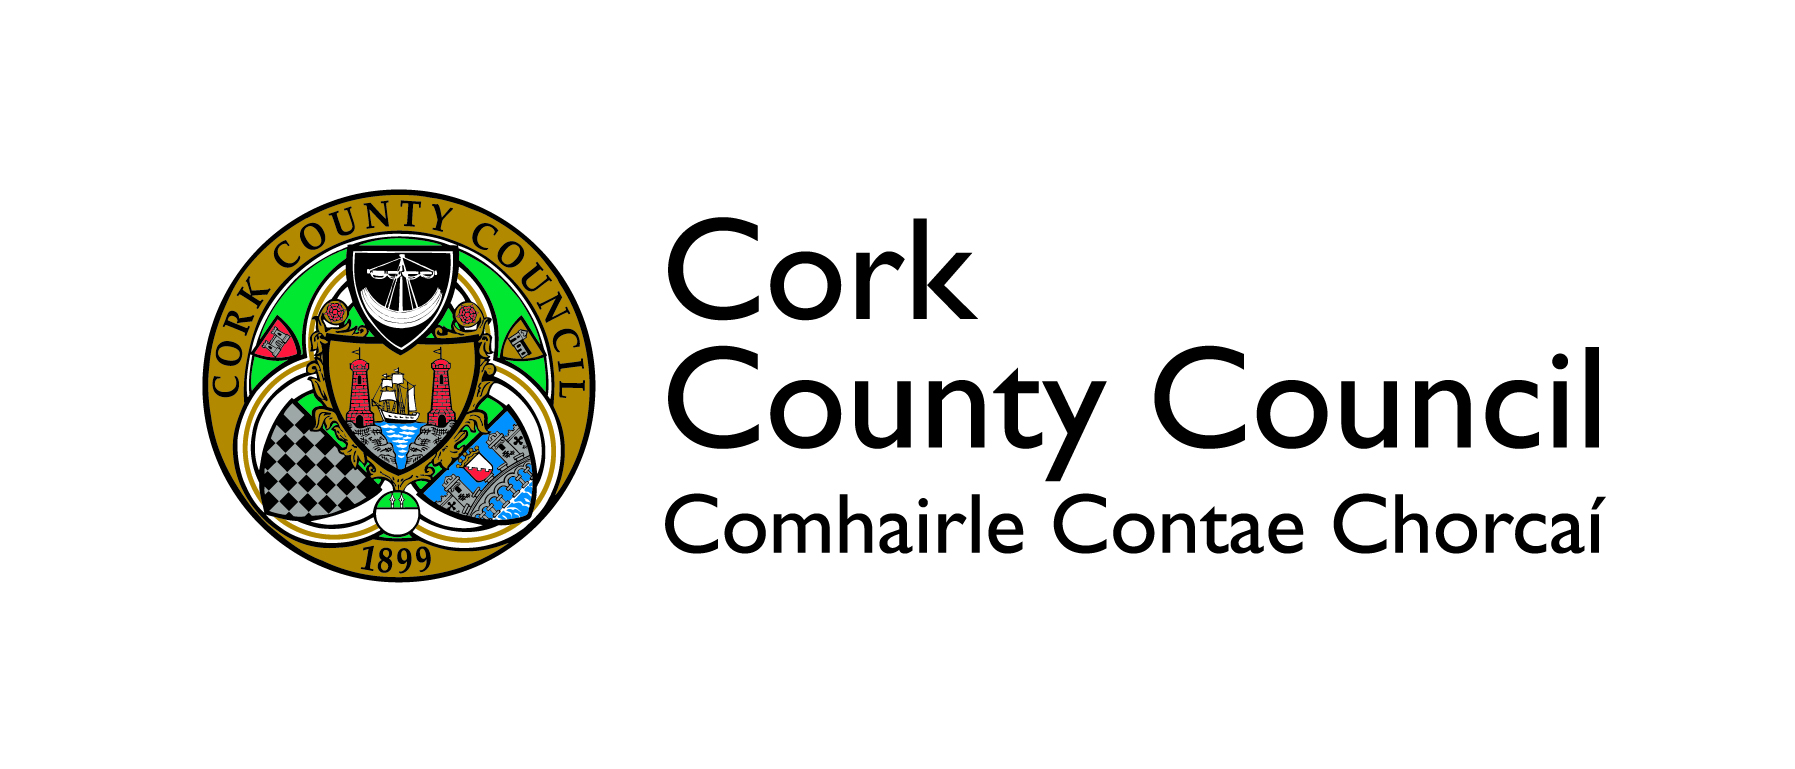 Cork County Council unanimous in its resolve to get right outcome for Cork